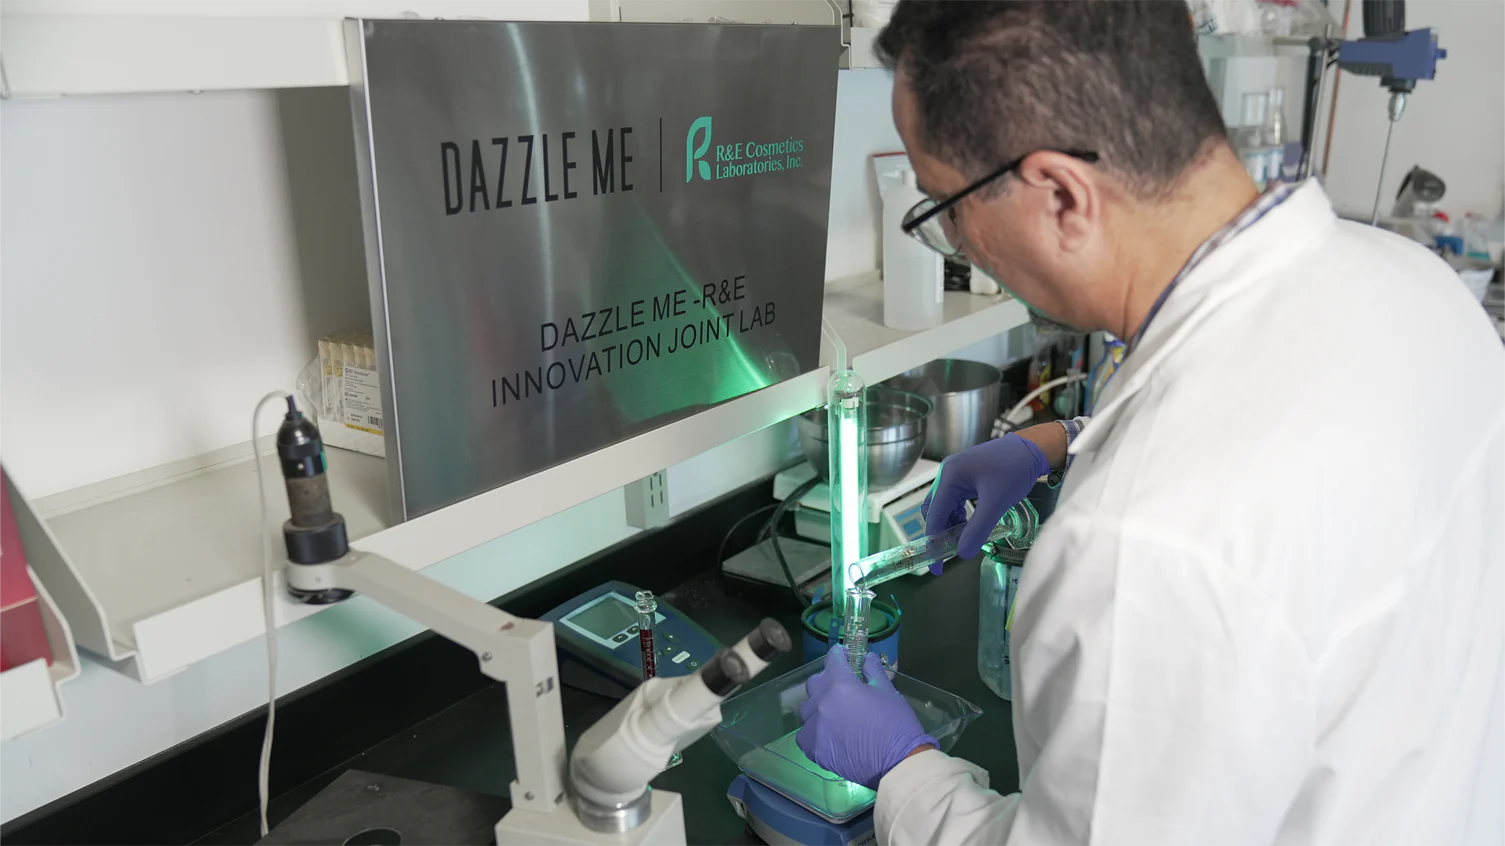 DAZZLE ME: UNVEILING THE EPITOME OF BEAUTY INNOVATION WITH THE JOINT LAB IN NEW YORK AND LOS ANGELES